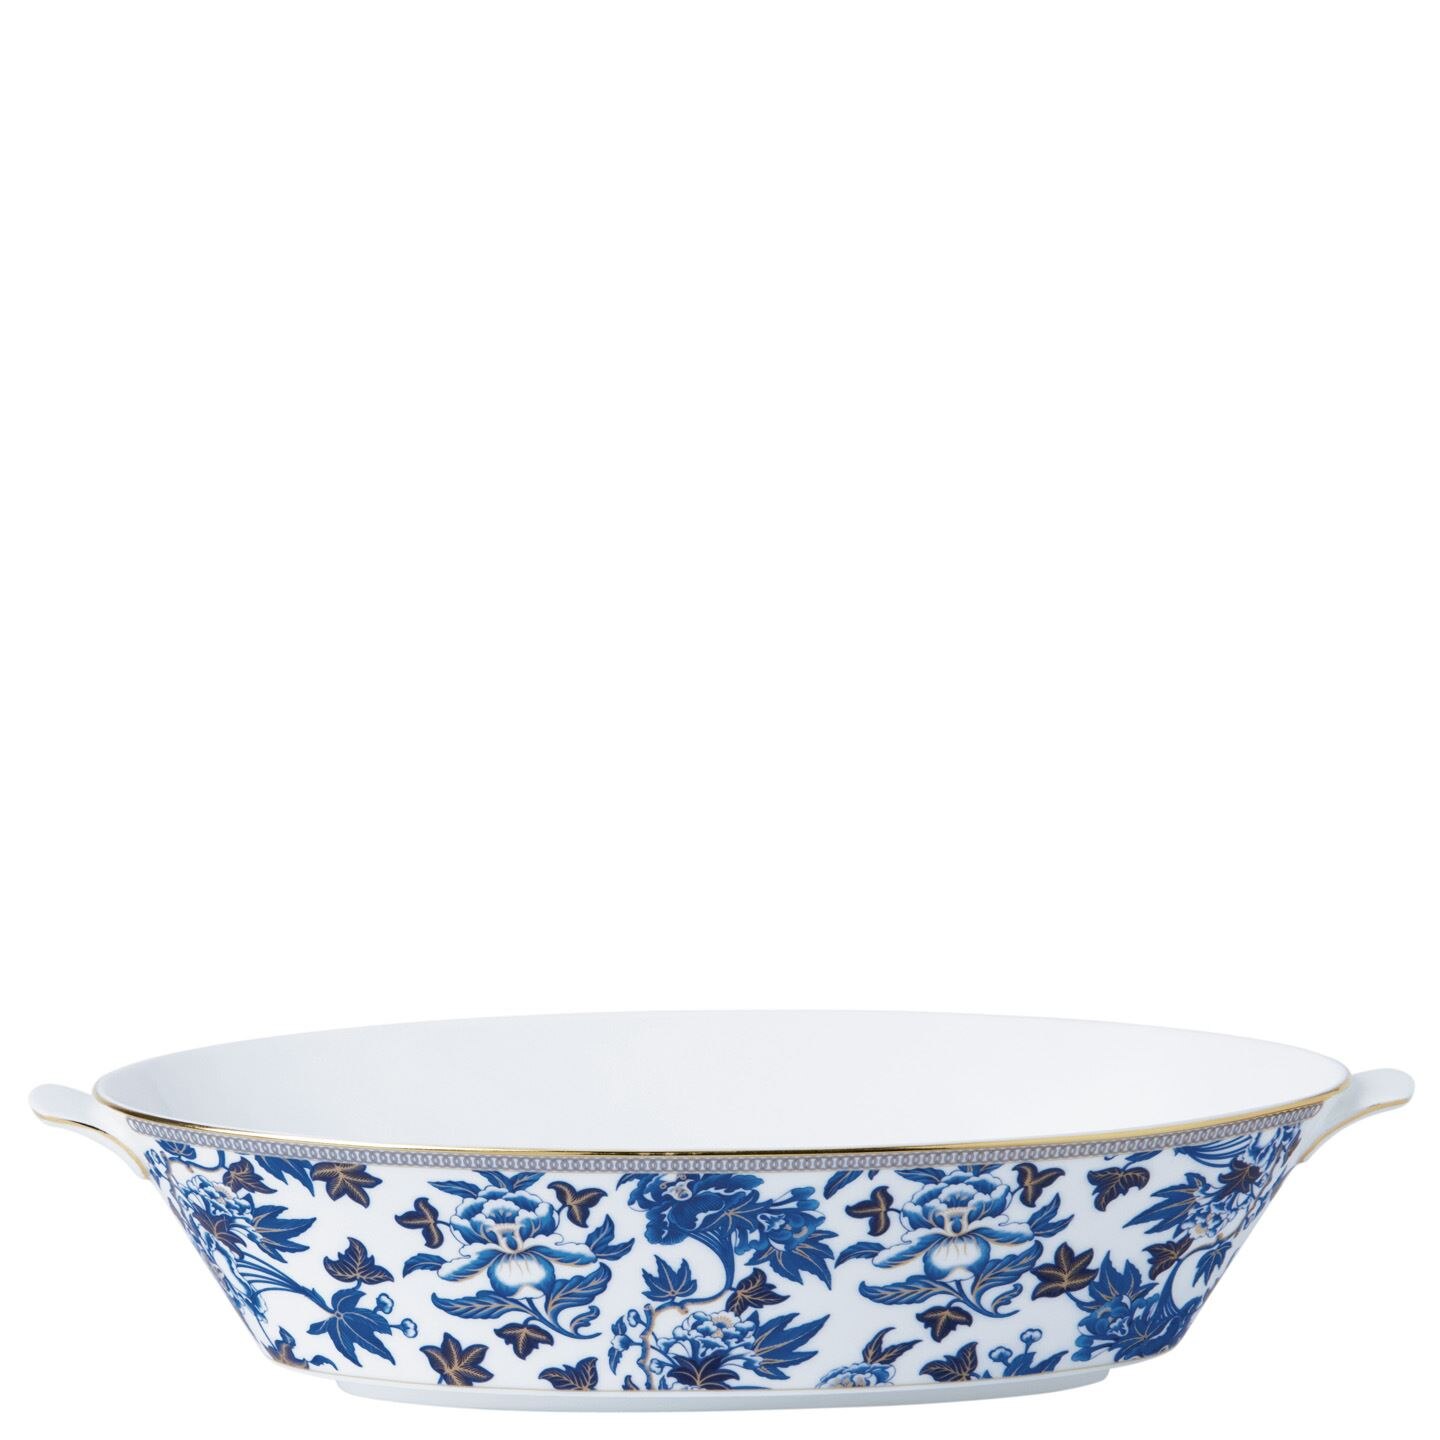 Leeber 70066 10.5 x 2.75 in. Butterfly Large Square Serving Bowl